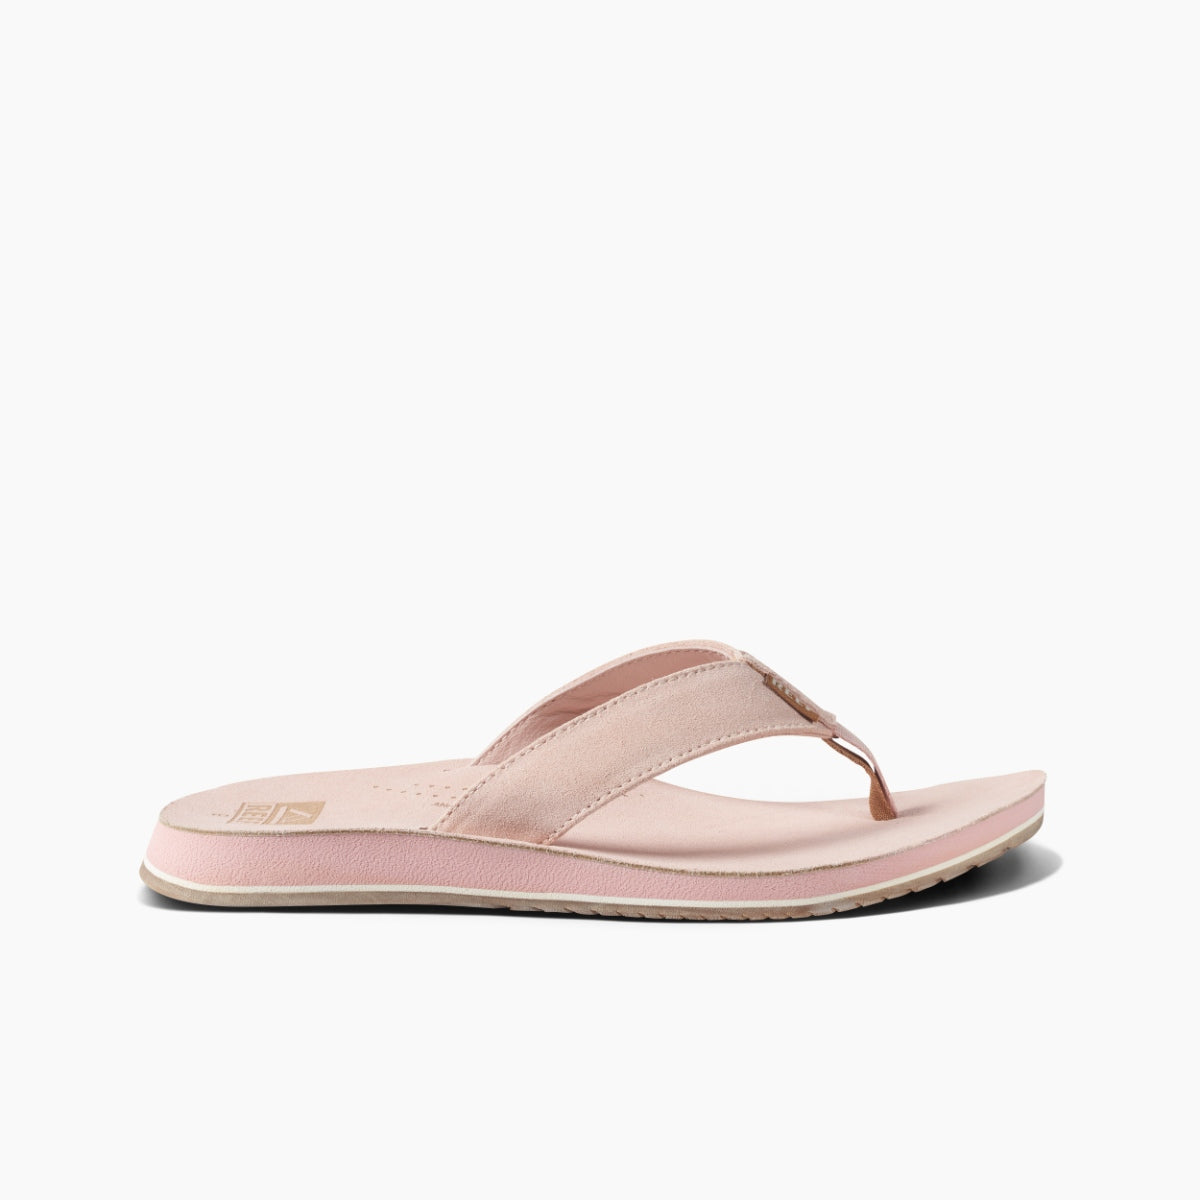 Men's Drift Classic Leather Sandals in Sandy Rose | REEF®